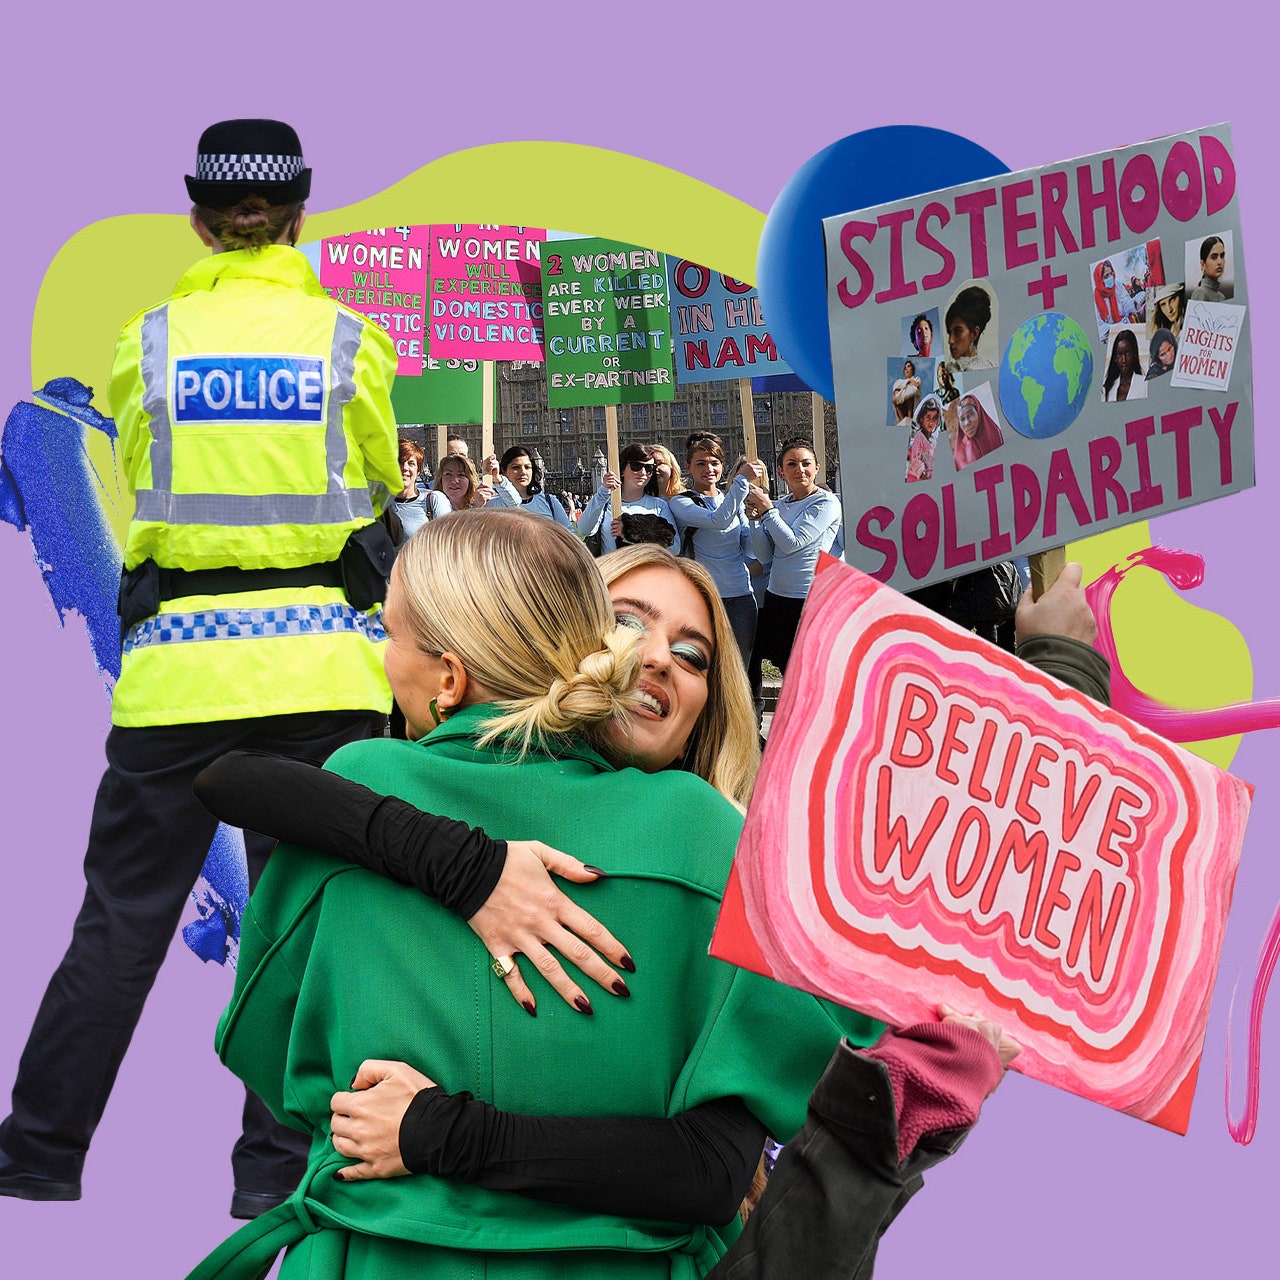 ‘We can achieve a world where women are safe from abuse’: Refuge's CEO Ellen Miller on the need for urgent governmental funding and police reform